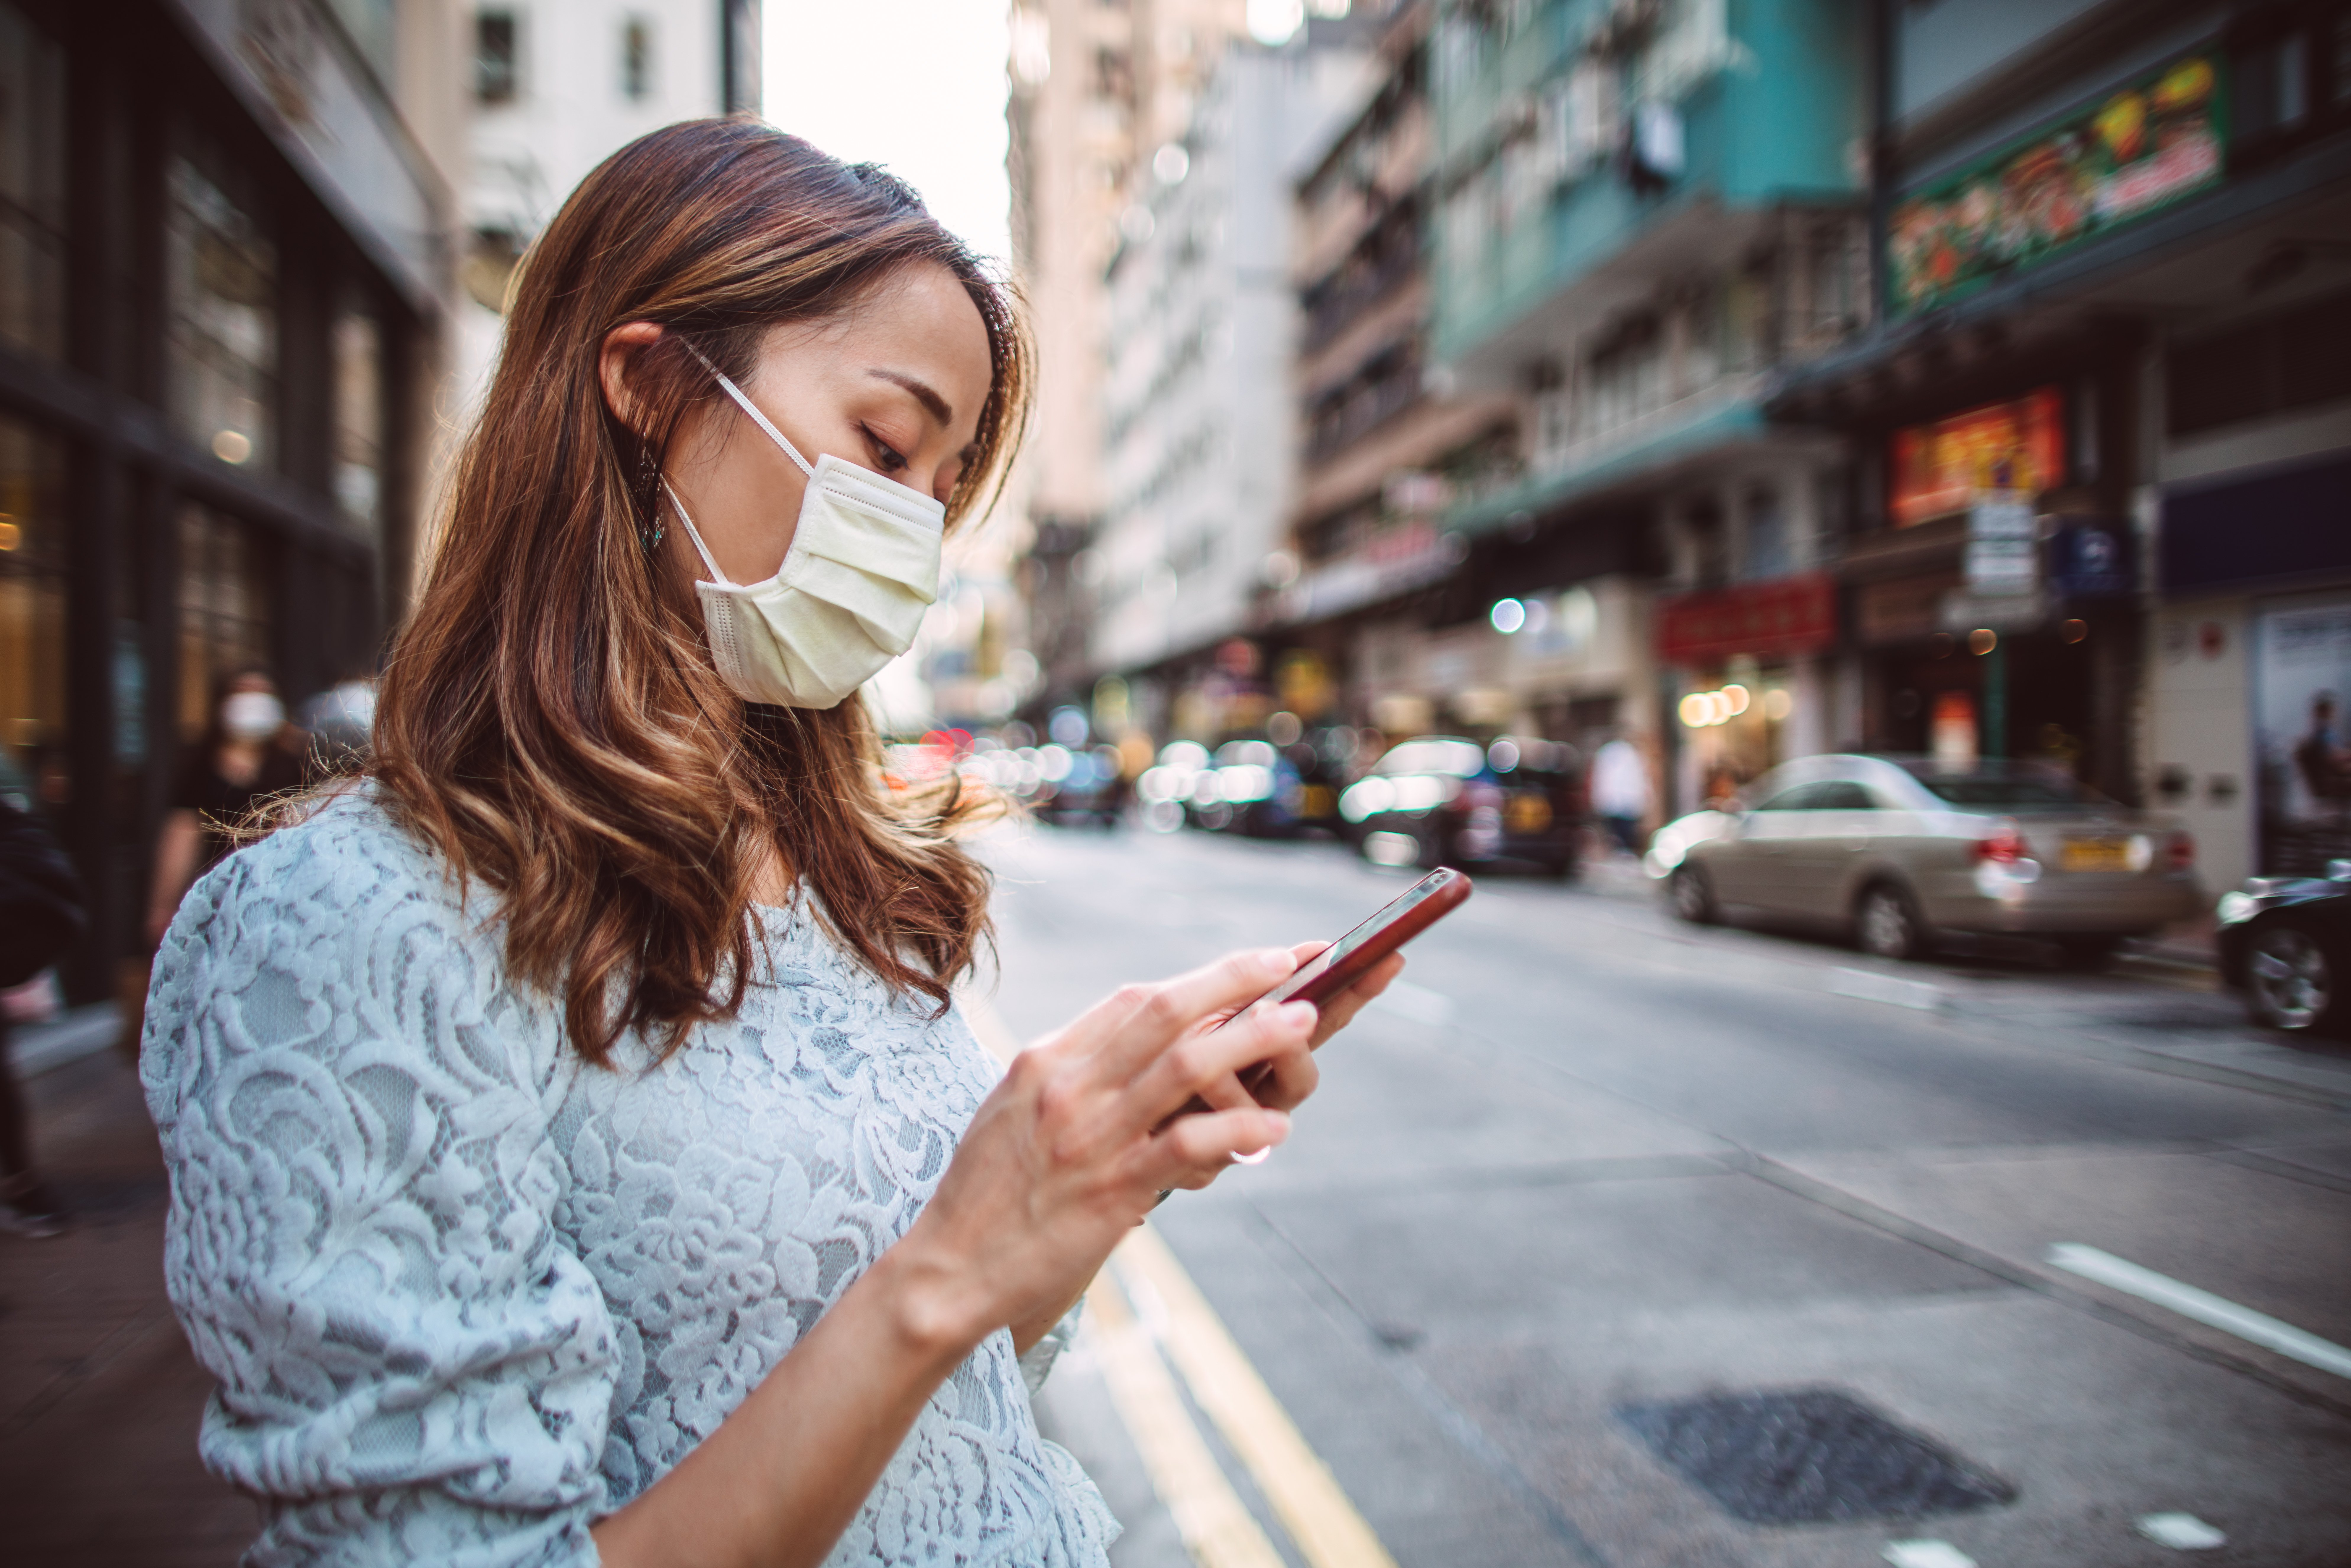 A woman in a mask users her smartphone next to a city street